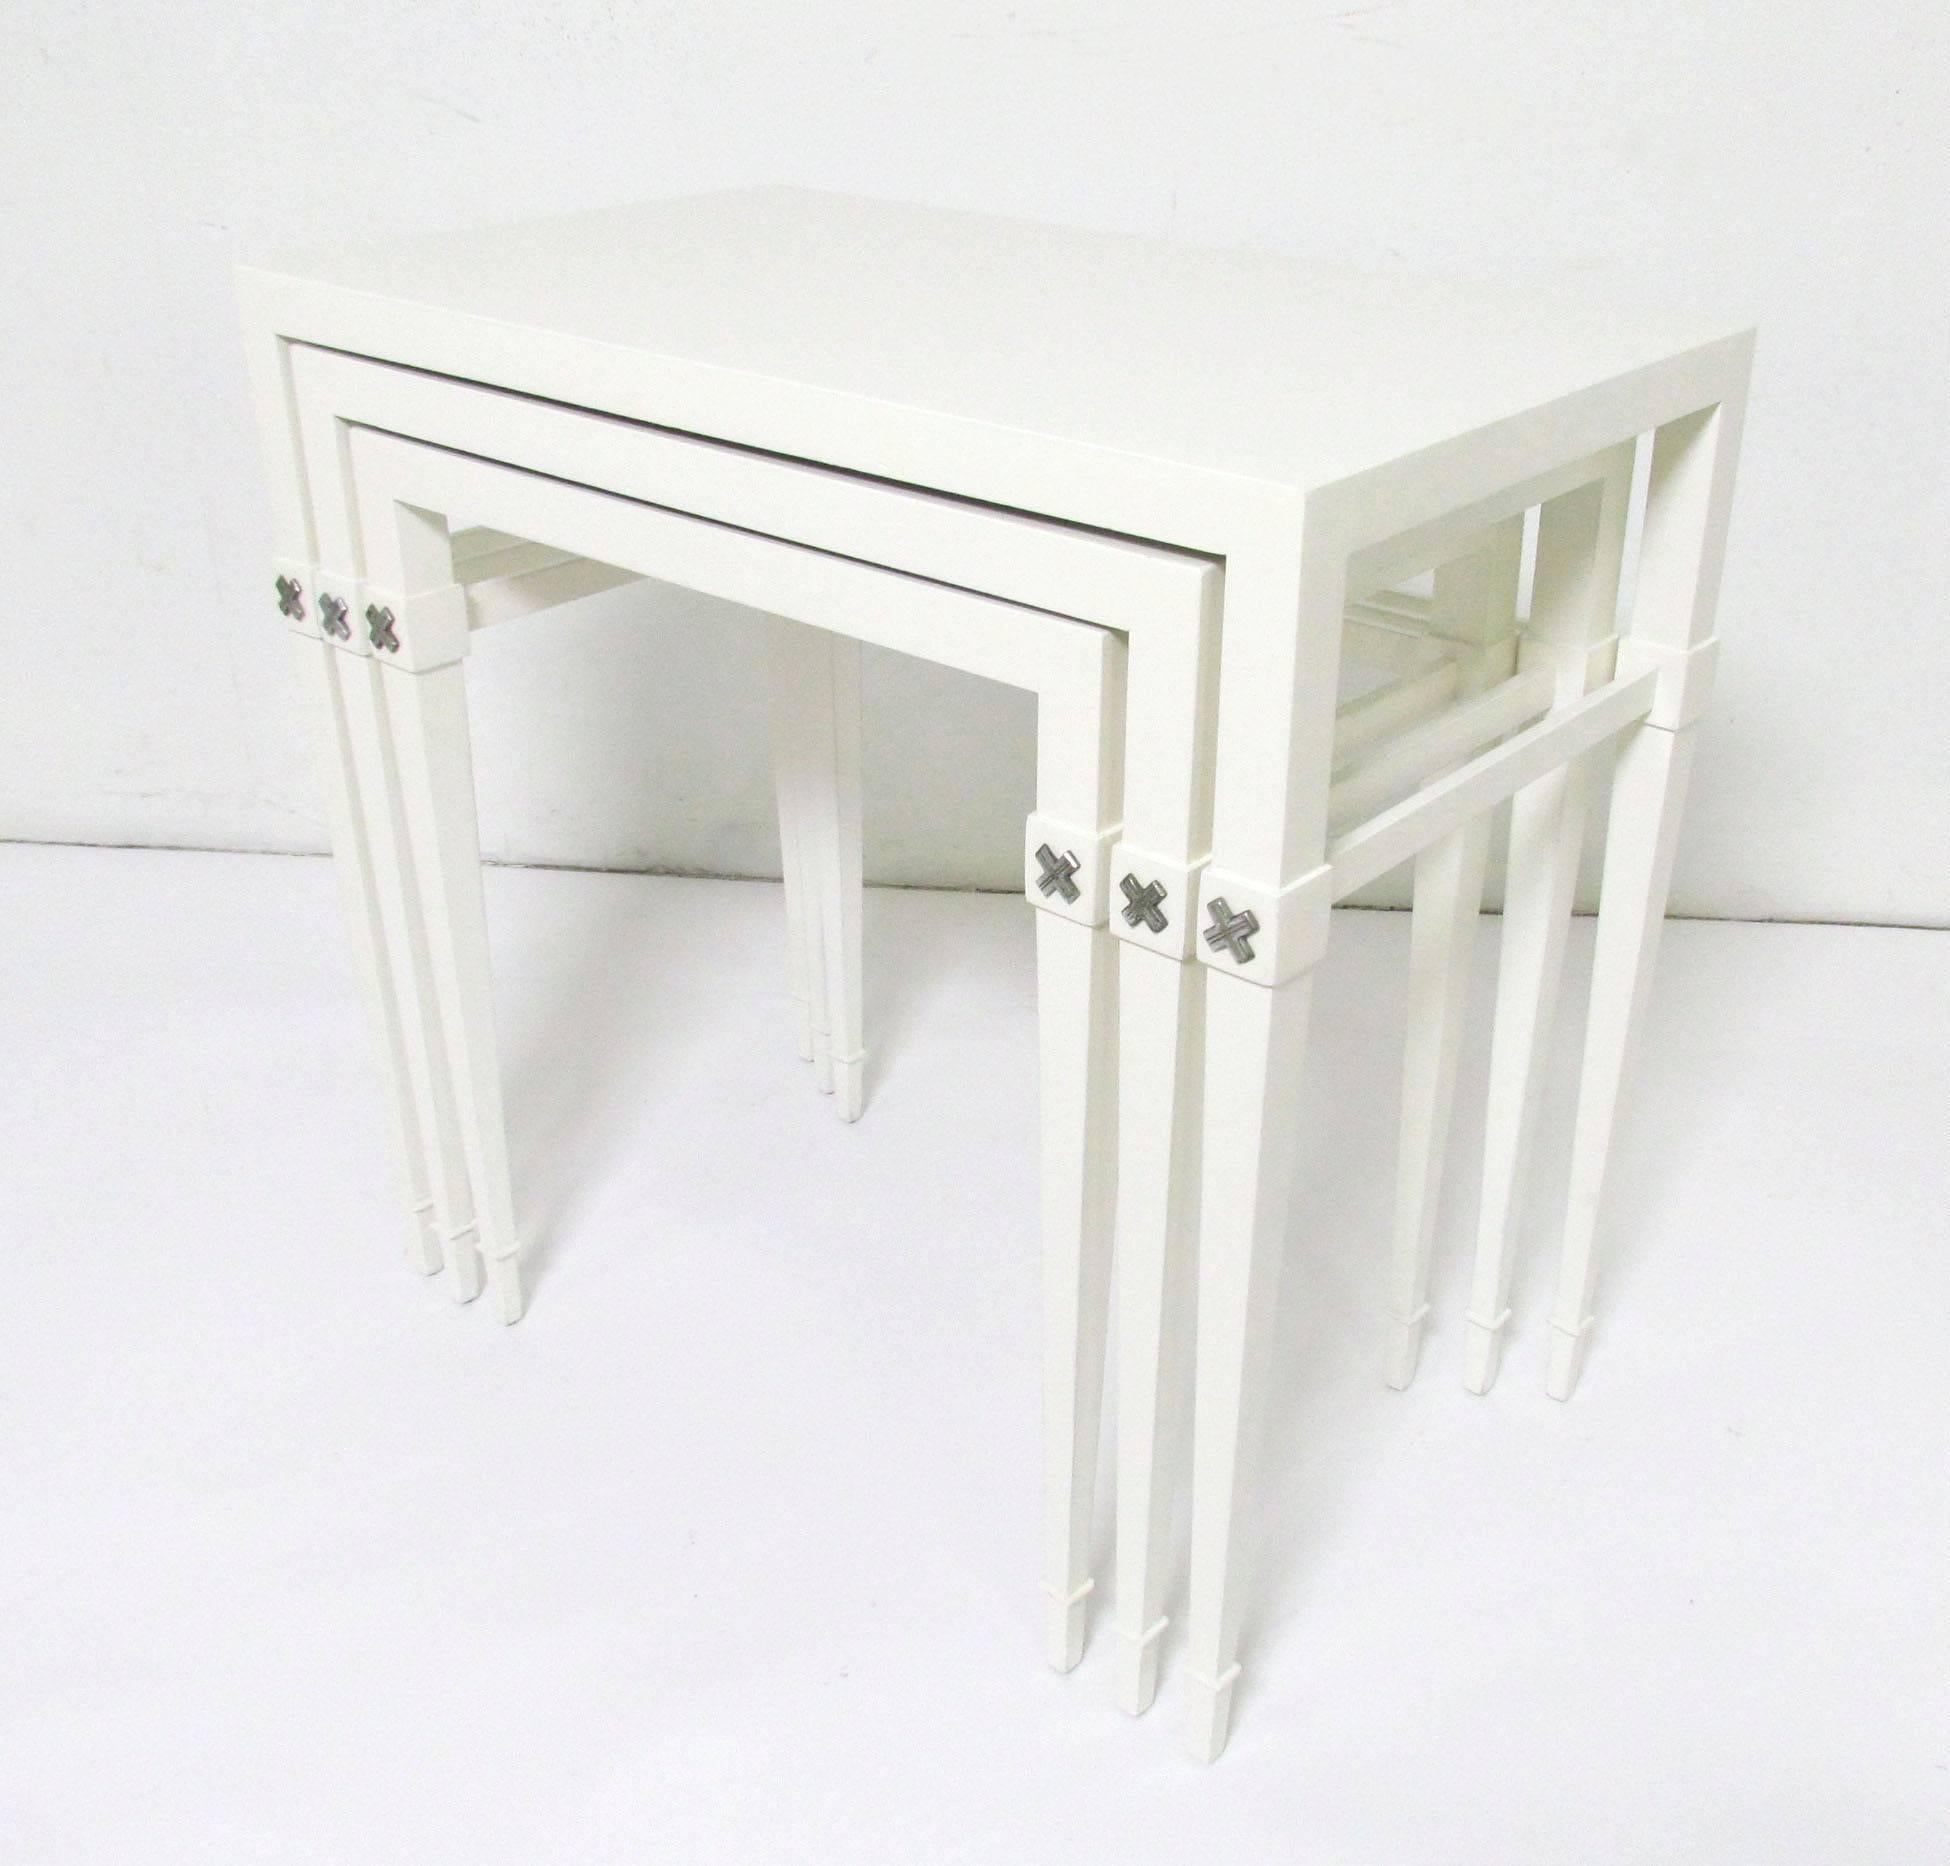 Set of three nesting tables, lacquered wood with nickel accents, by Tommi Parzinger for Charak Modern, circa 1950s.

Largest table measures 25.5